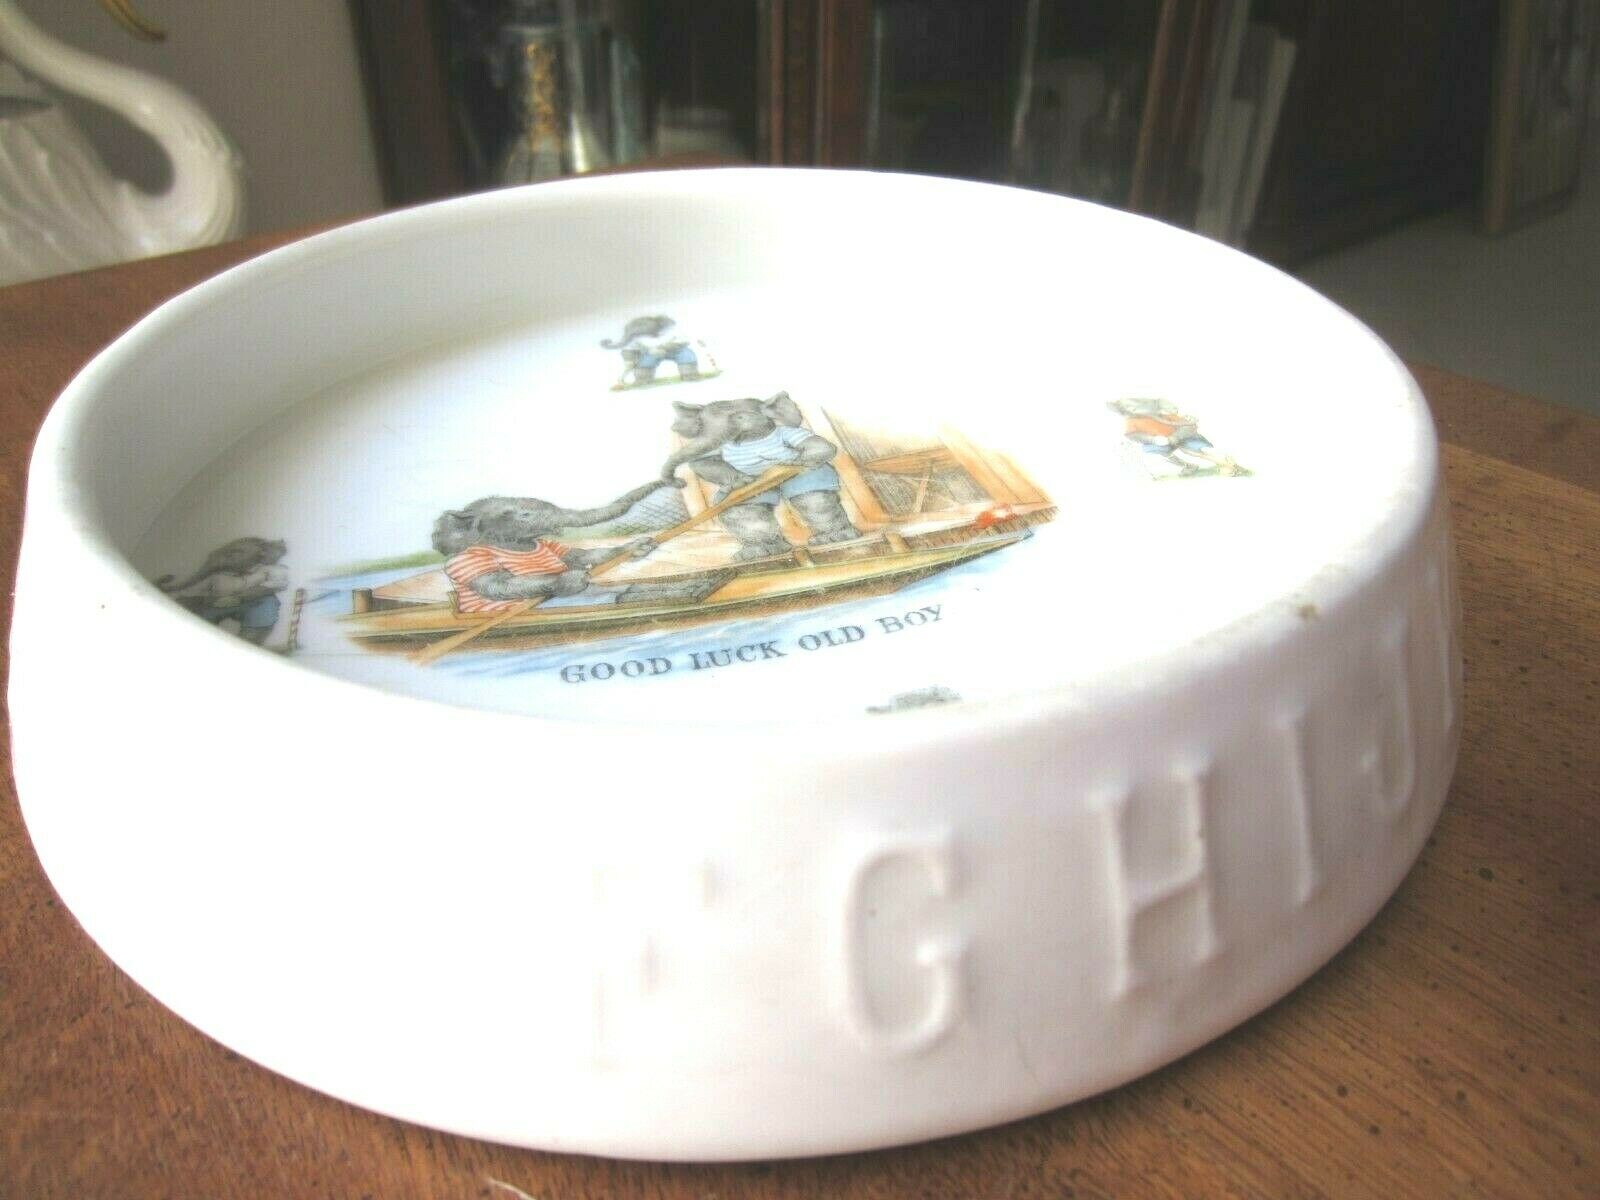 Vintage Germany Porcelain Baby Dish With Alphabet Around Side, 1.5" High By 6.5"